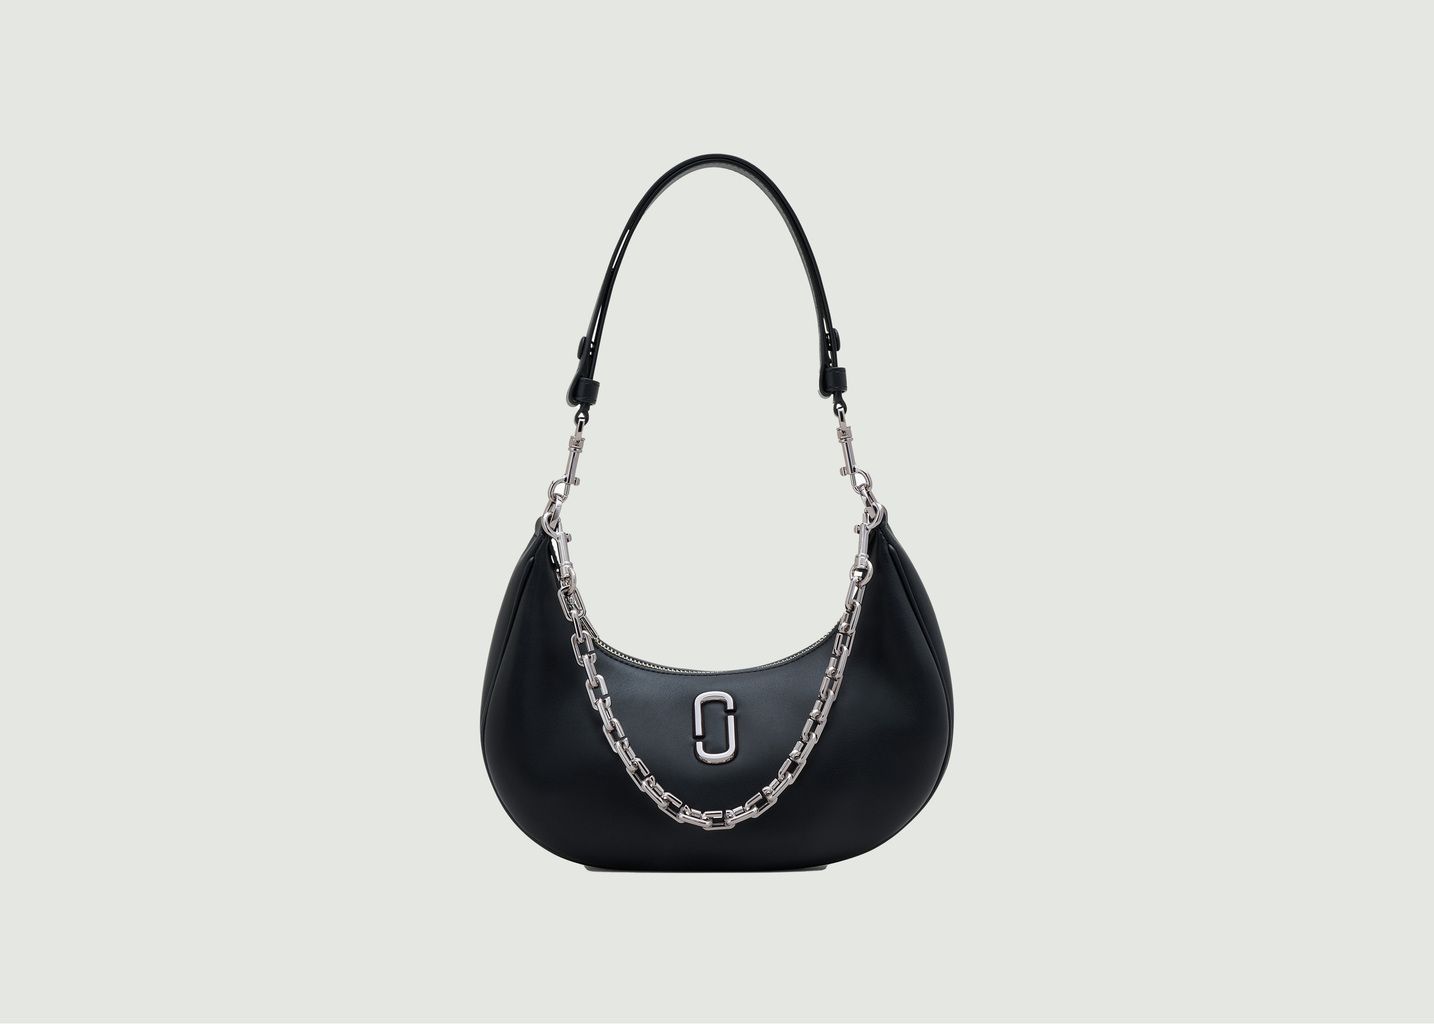 The Curve leather bag - Marc Jacobs